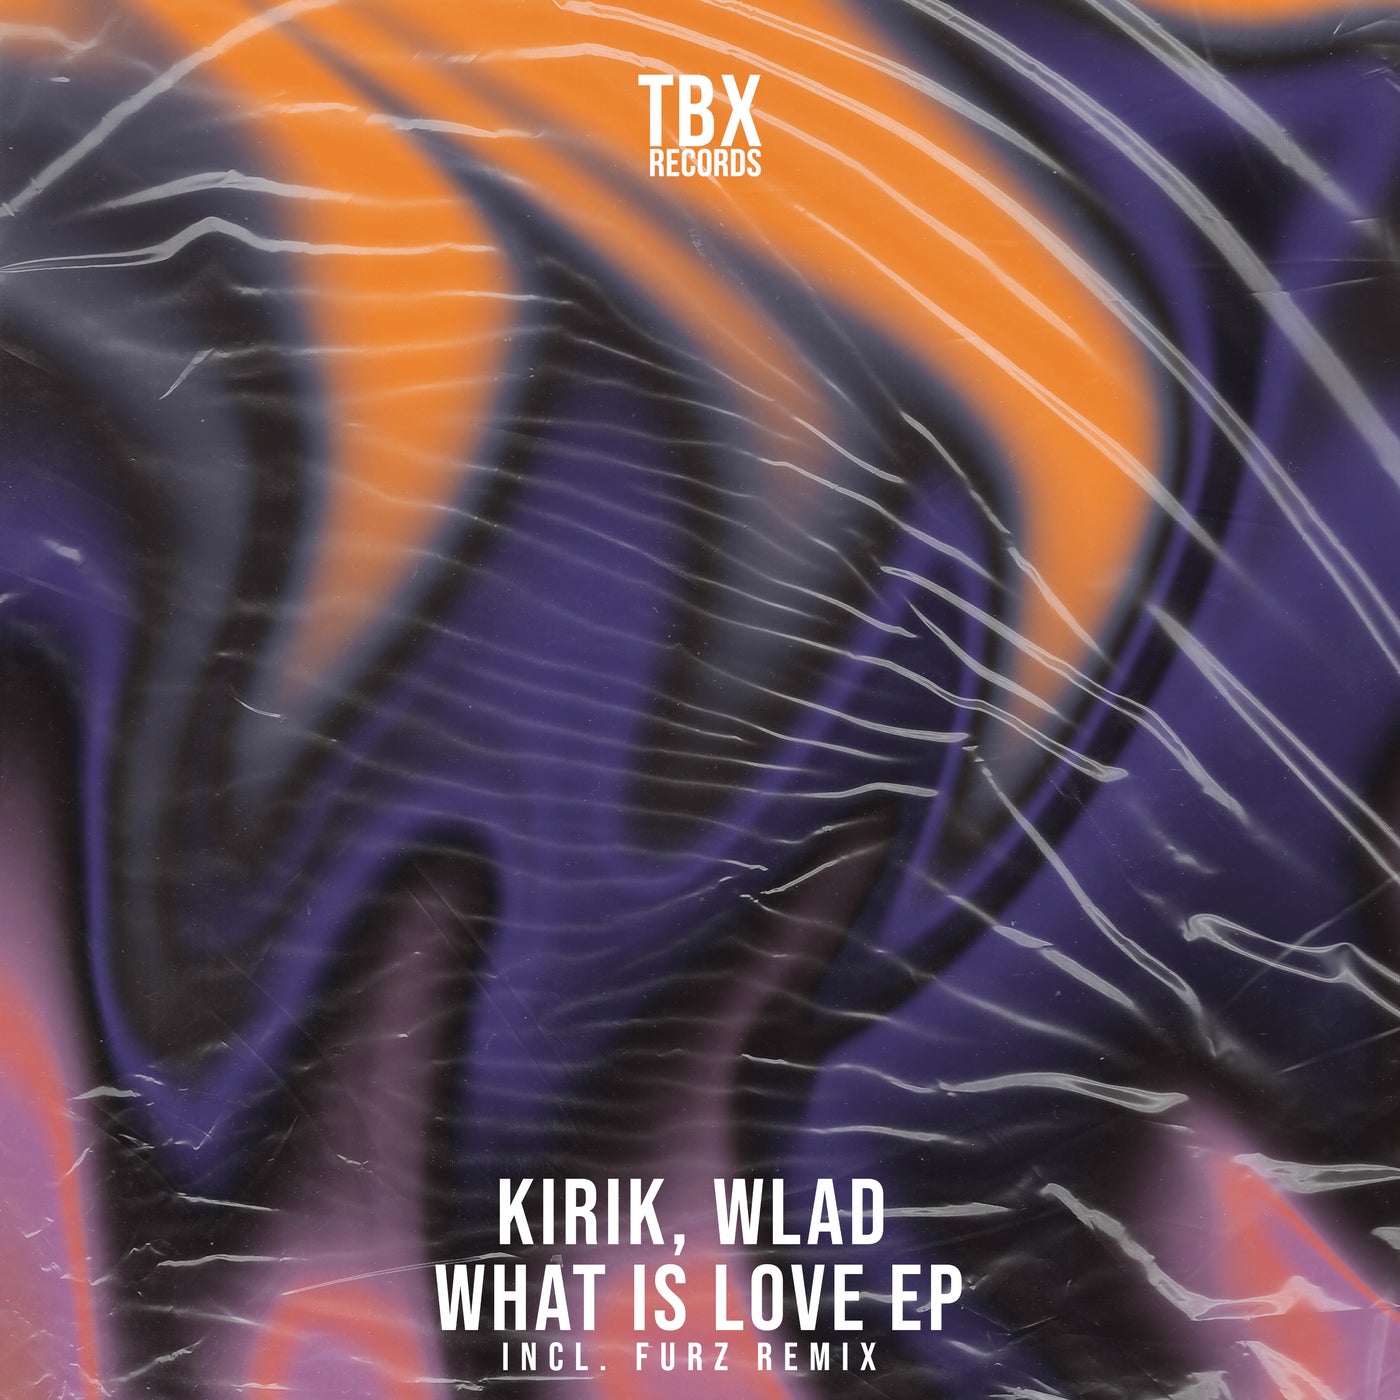 image cover: WLAD, KIRIK - What Is Love EP on TBX Records